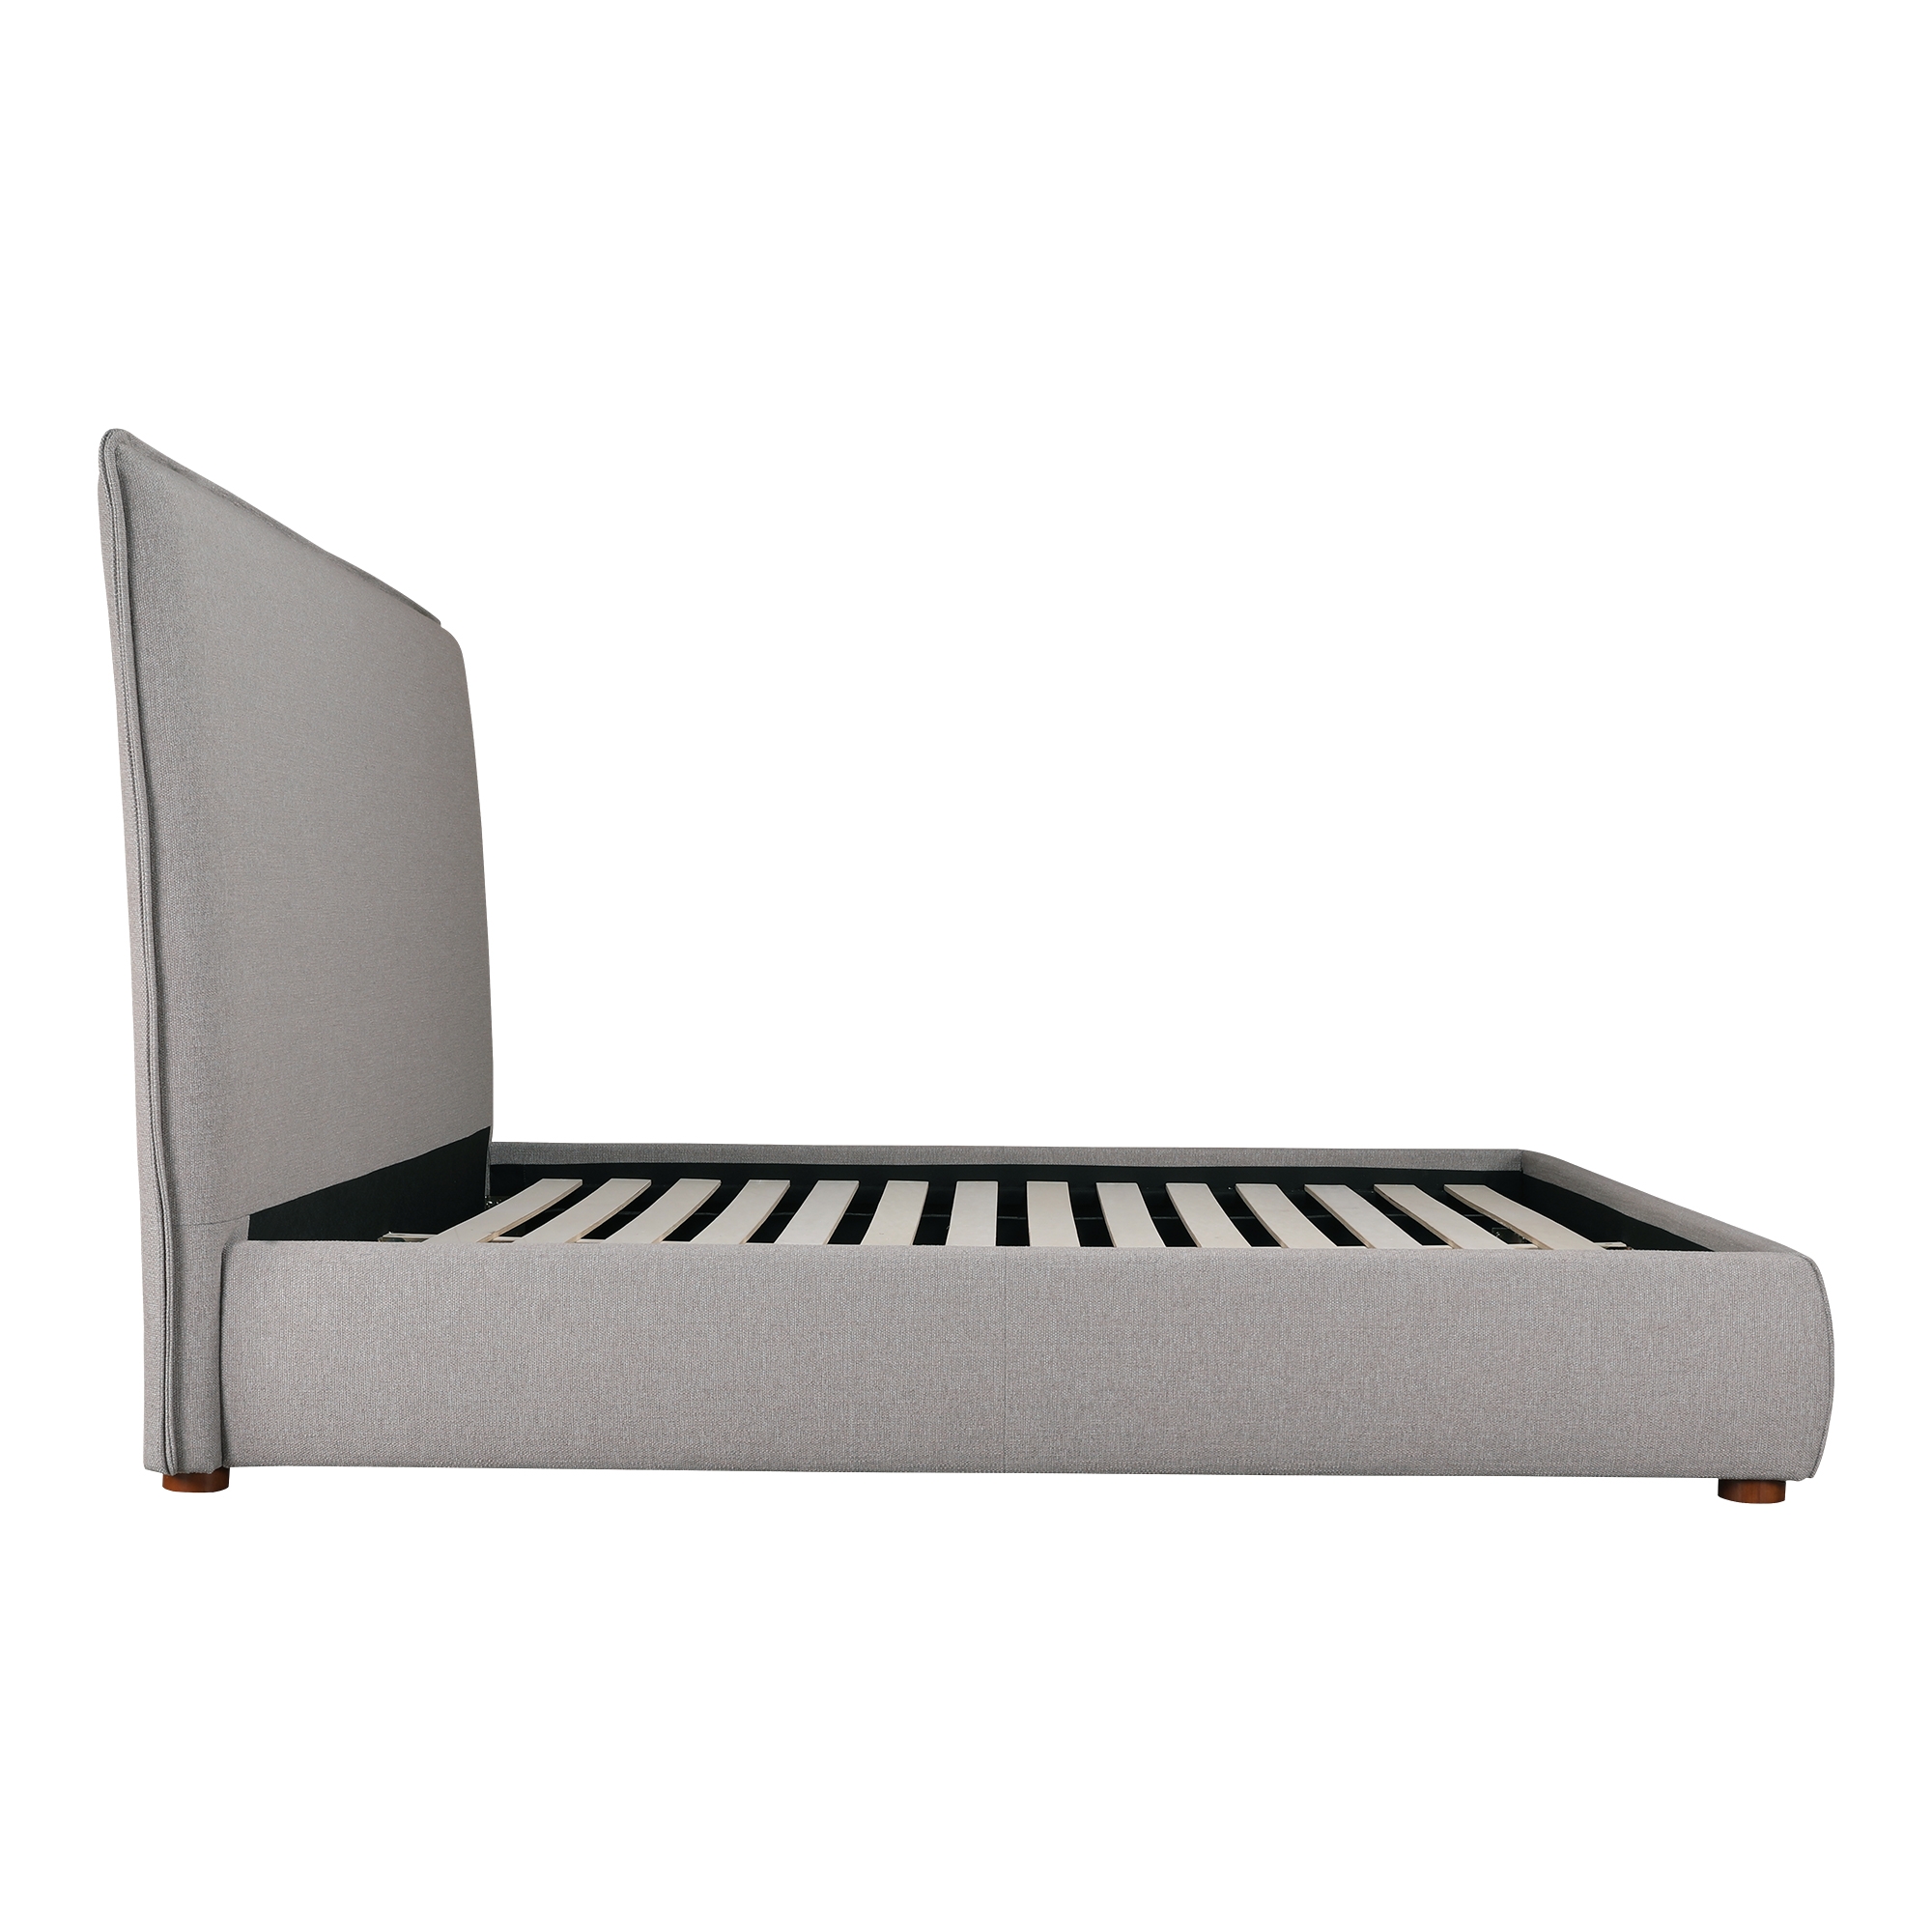 Luzon Queen Bed Tall Headboard Greystone - Image 3